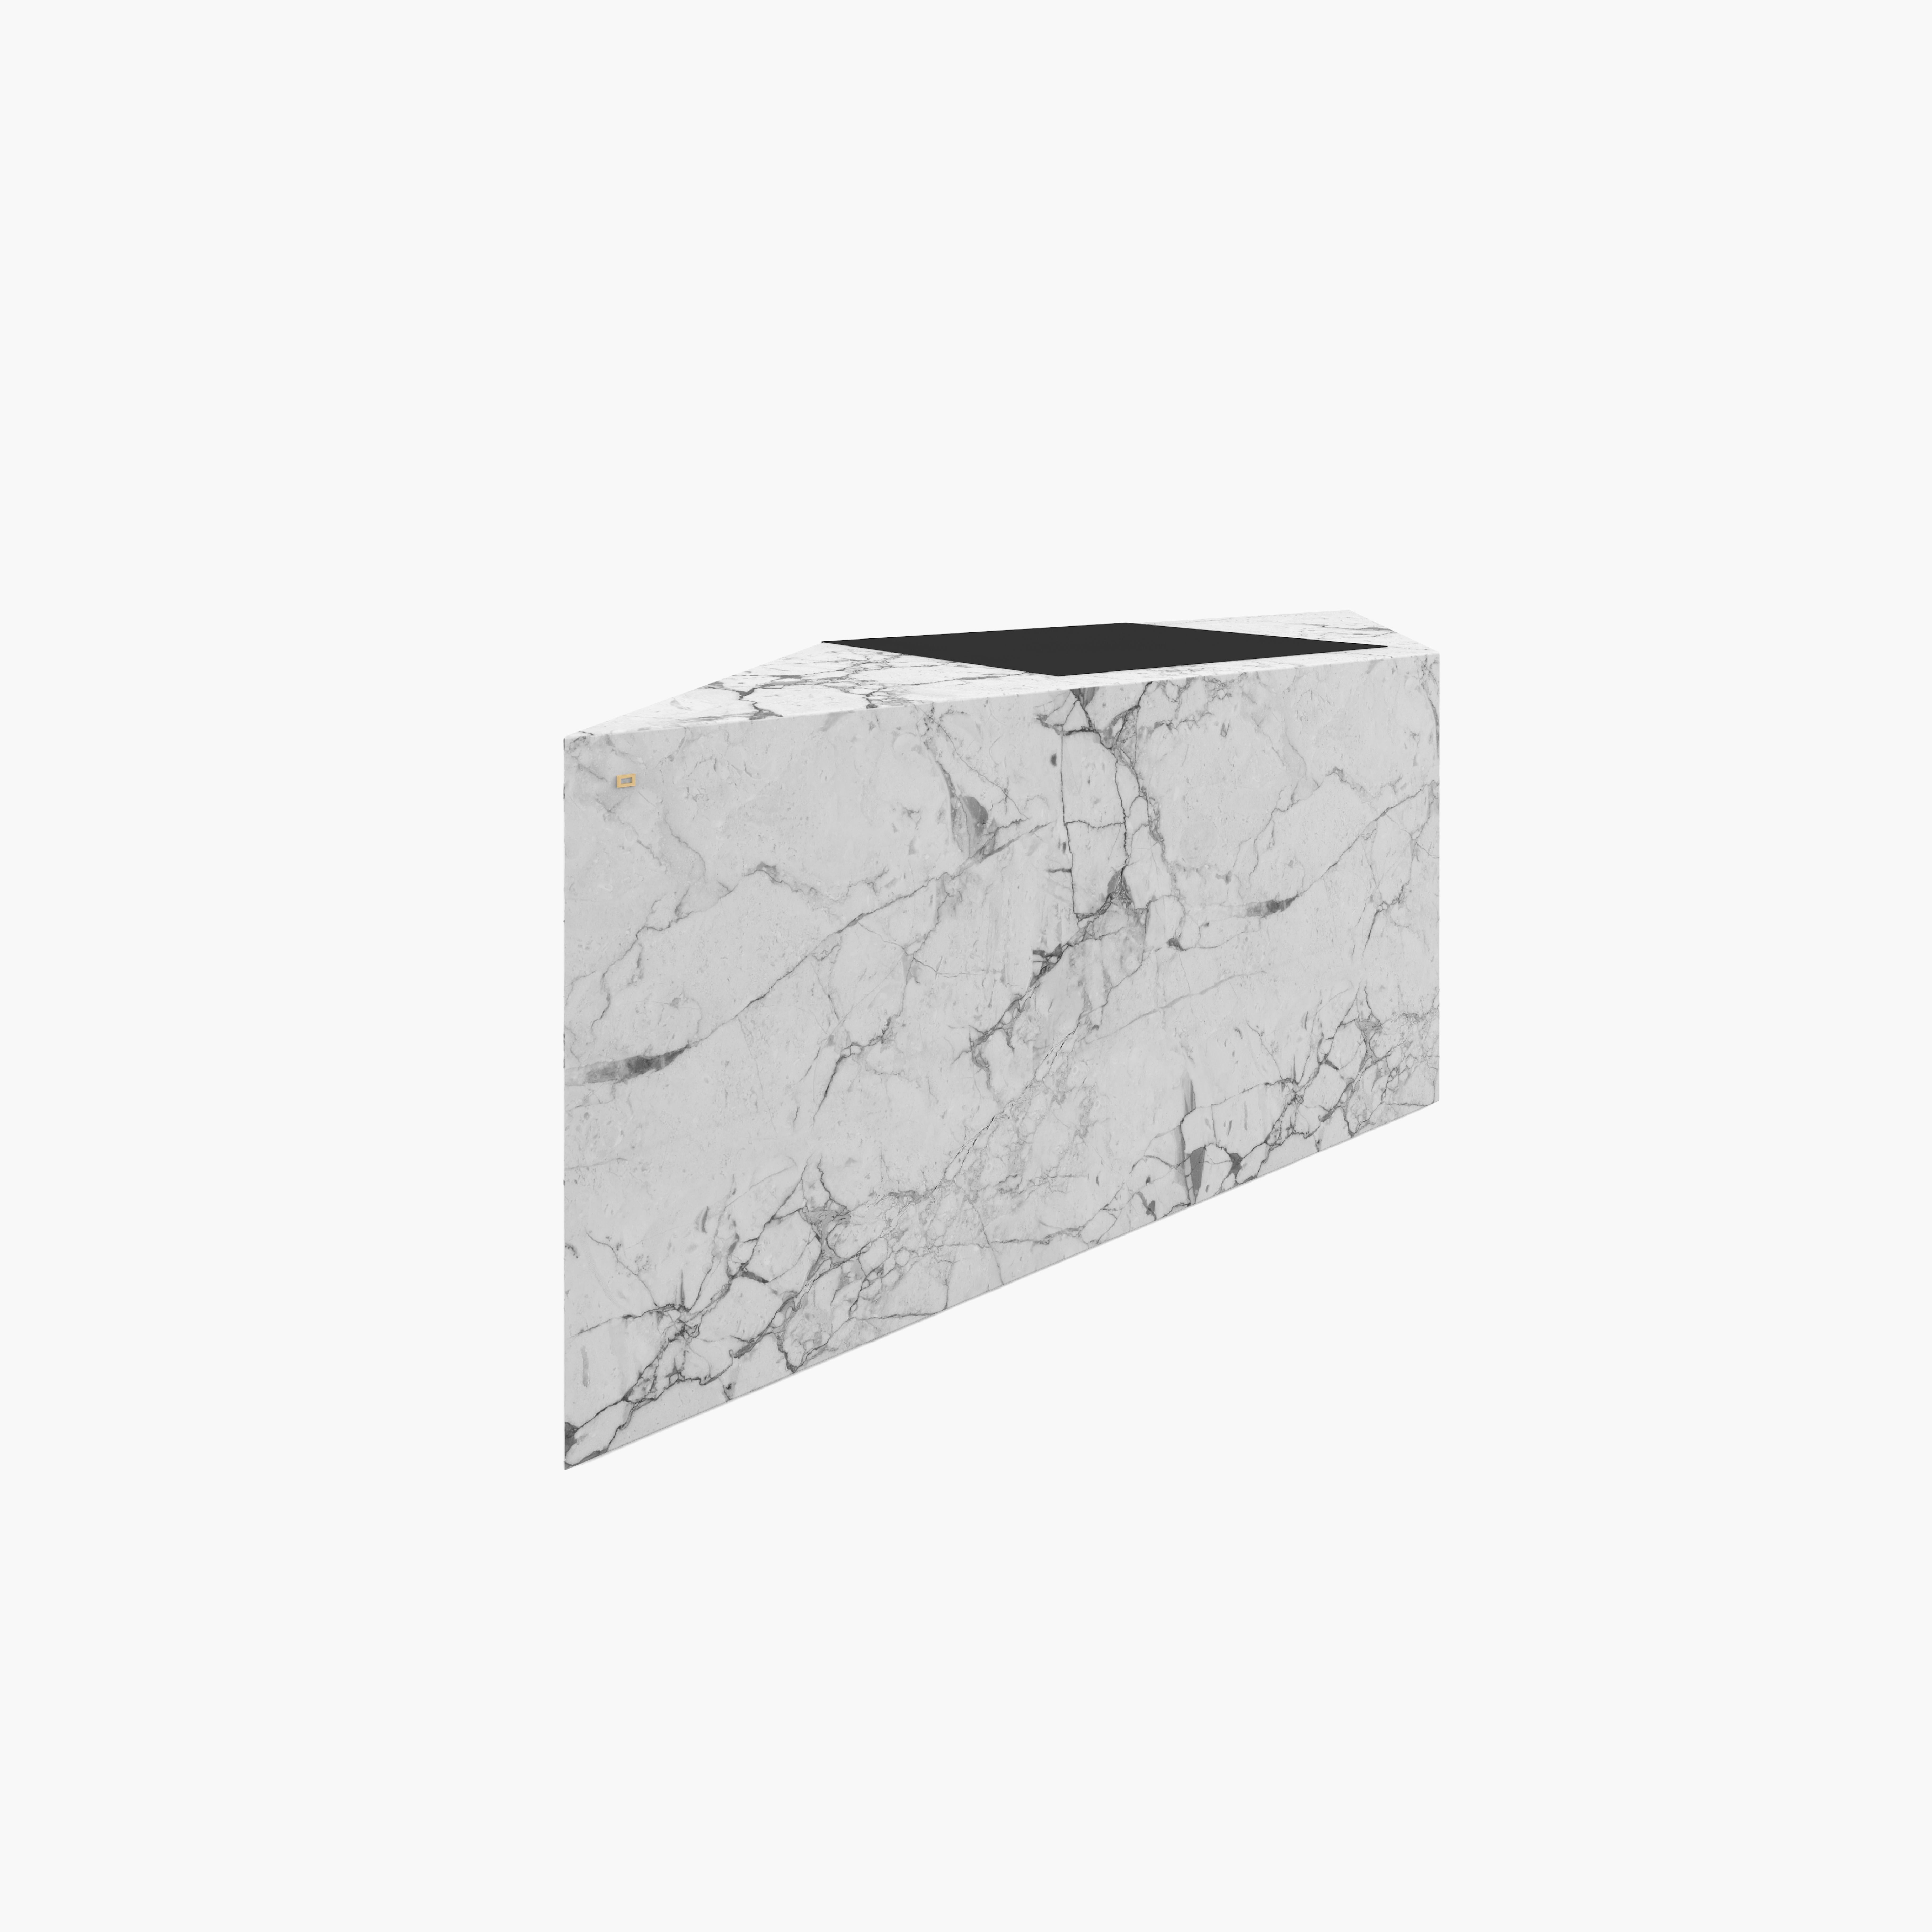 Contemporary Desk White Marble, Leather 225x75x75cm Trapezoid shape Germany Handcrafted pc1/1 For Sale